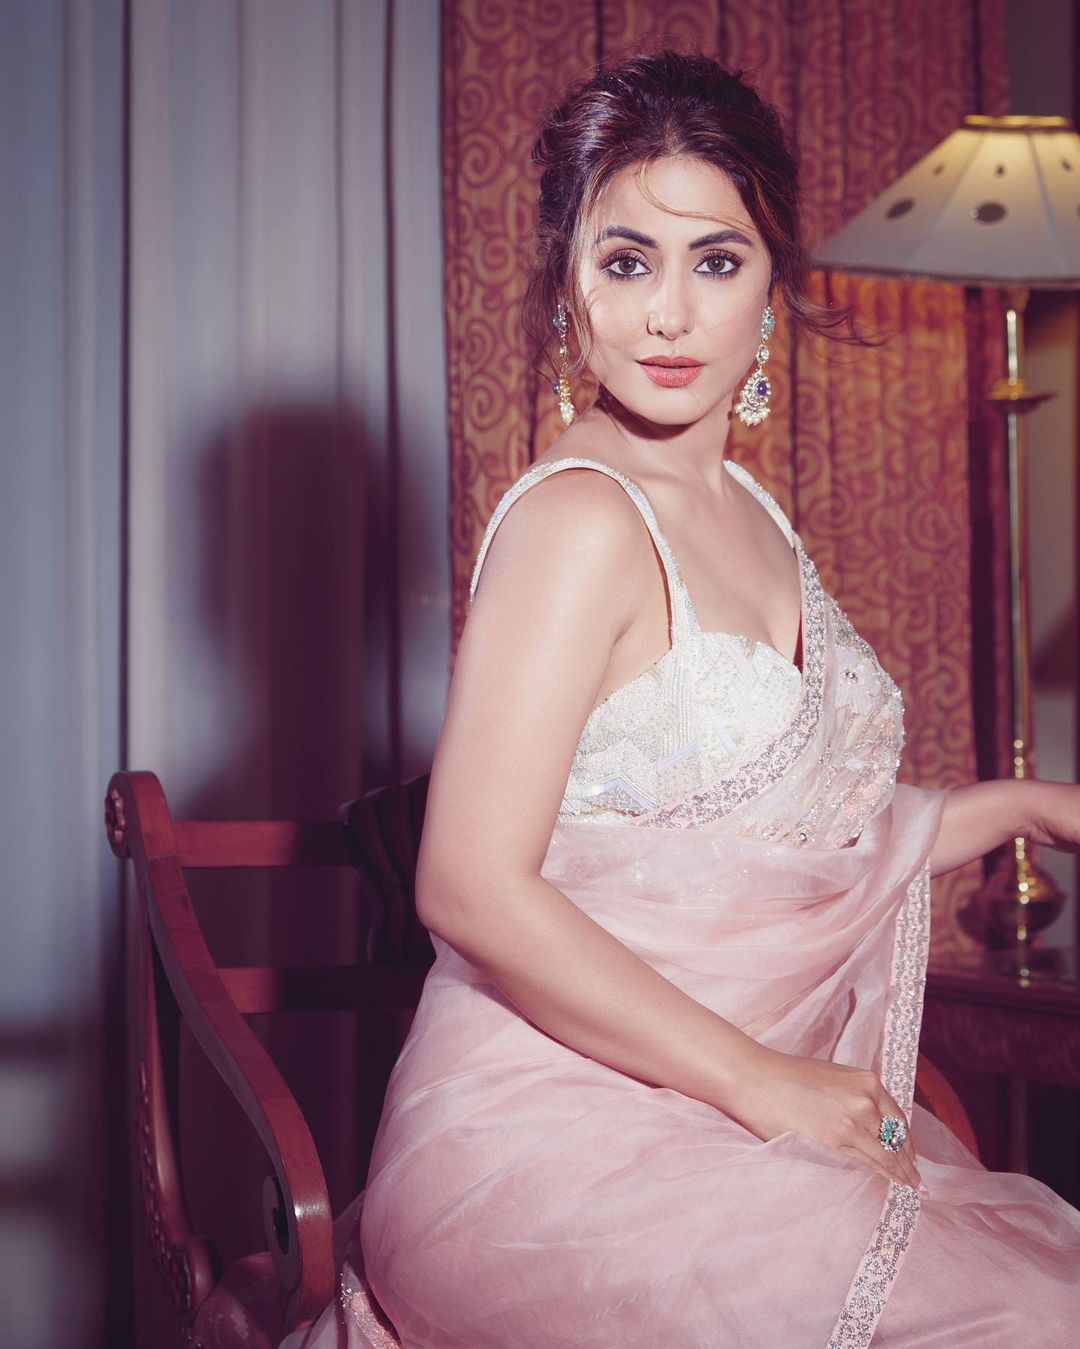 Hina Khan's hair has been styled in a messy bun.